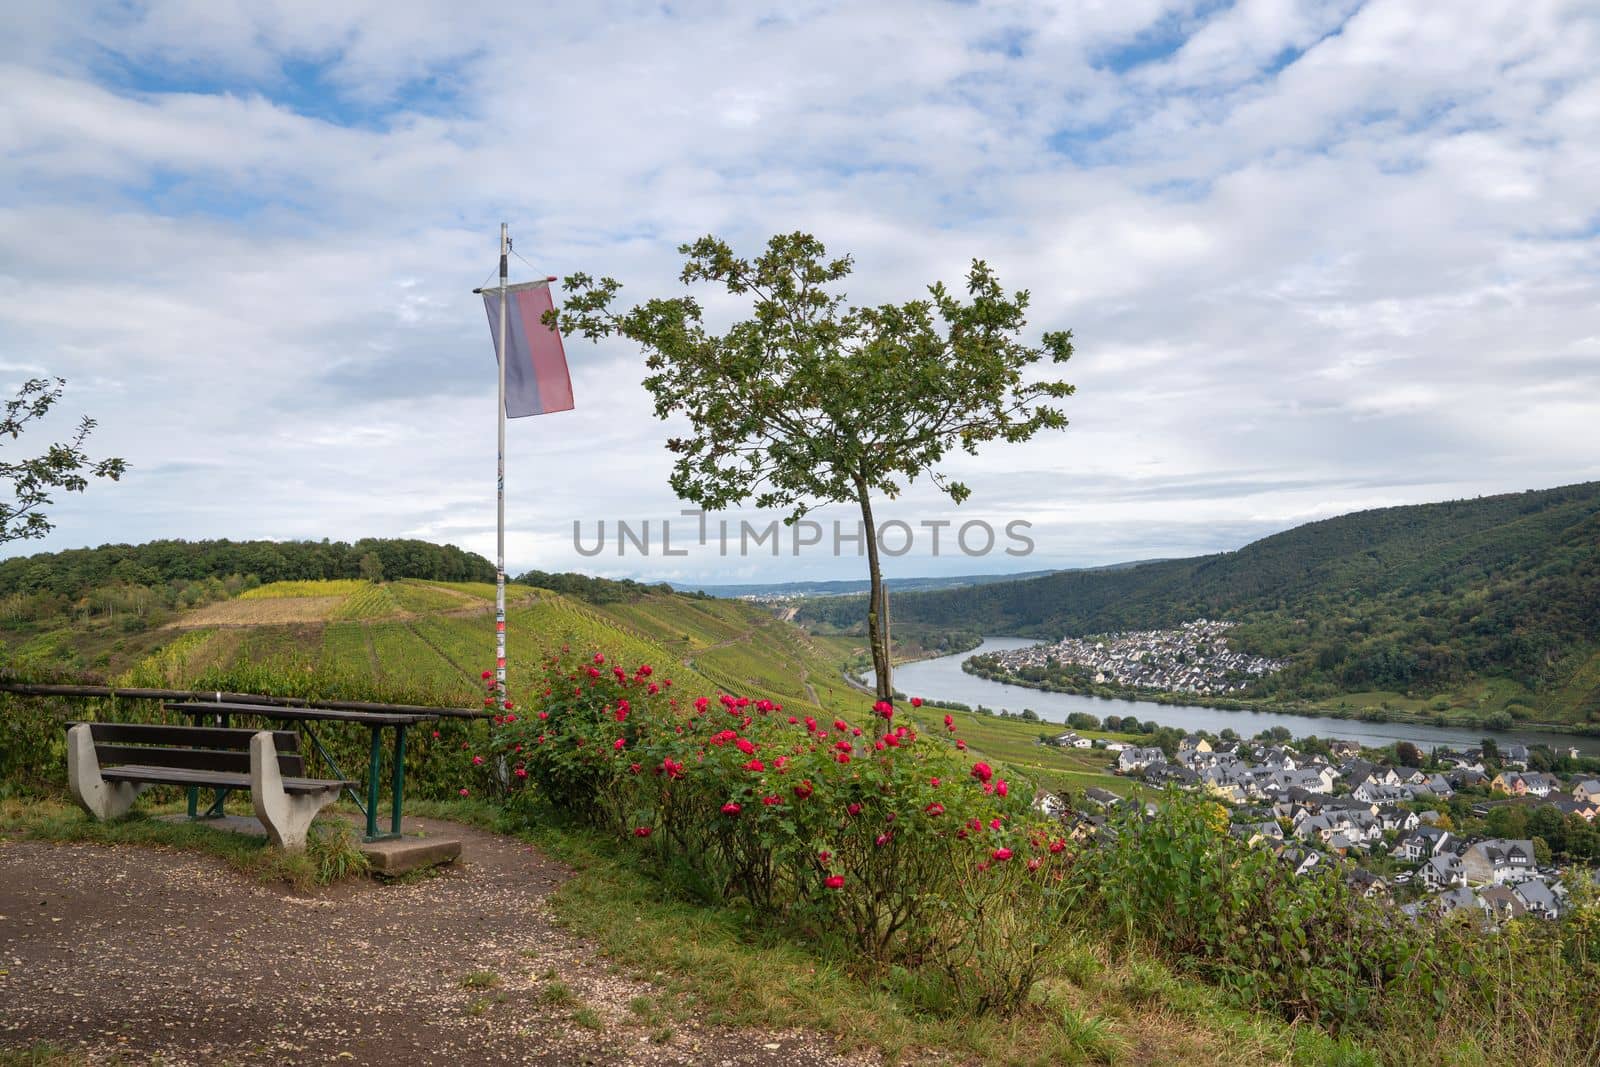 Panoramic view from a viewpoint over Winningen, Moselle, Germany